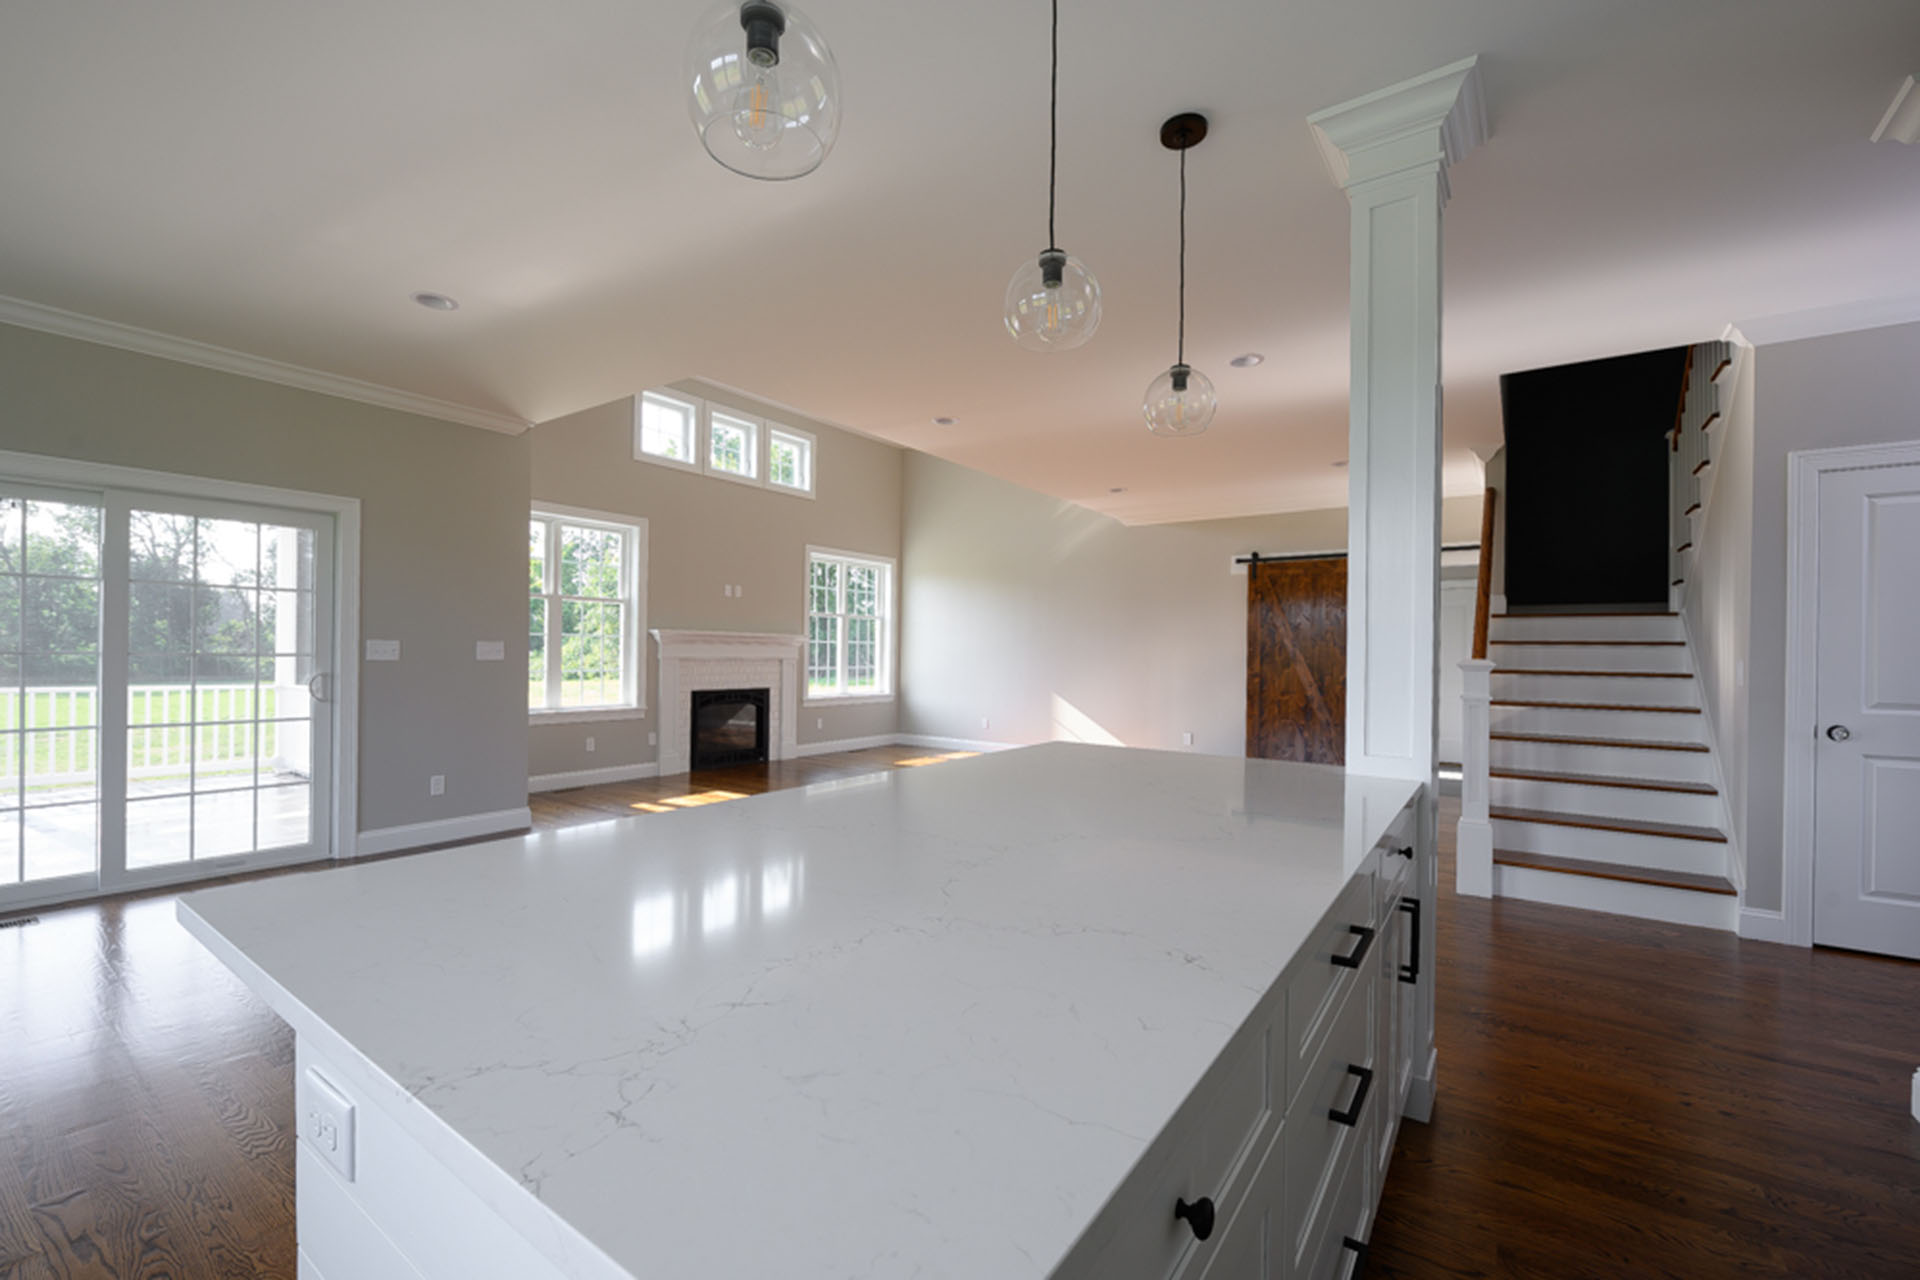 Center Island with White Countertop